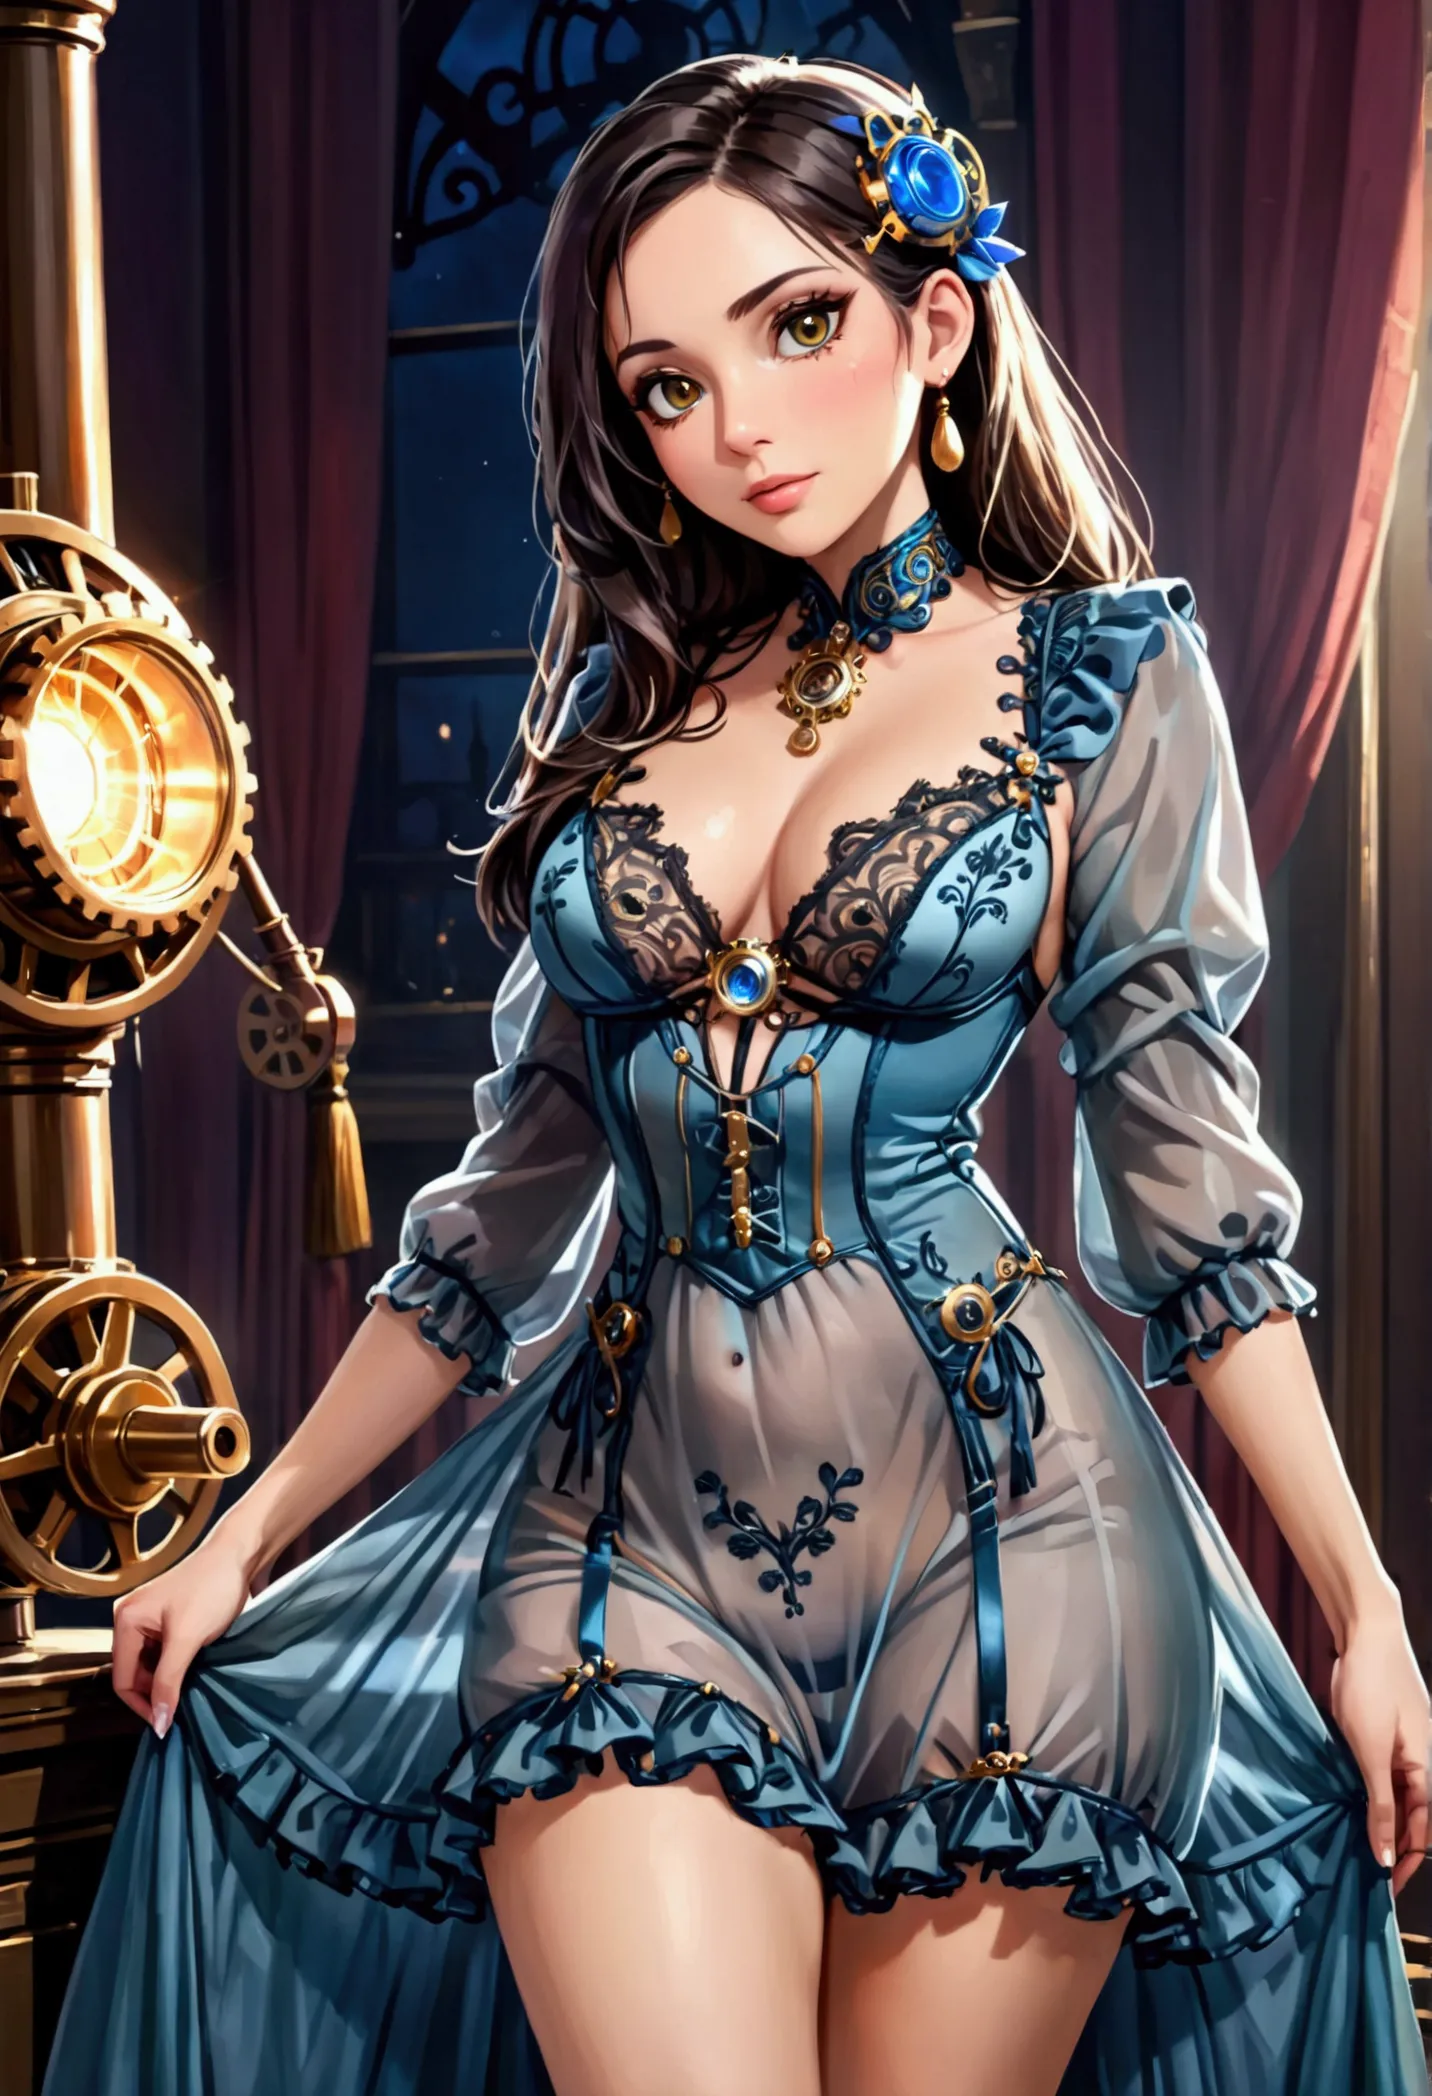 (a sultry steam-powered hostess, Malaysian woman of leisure, tantalizing sheer intricately embroidered night gown, complex gears...